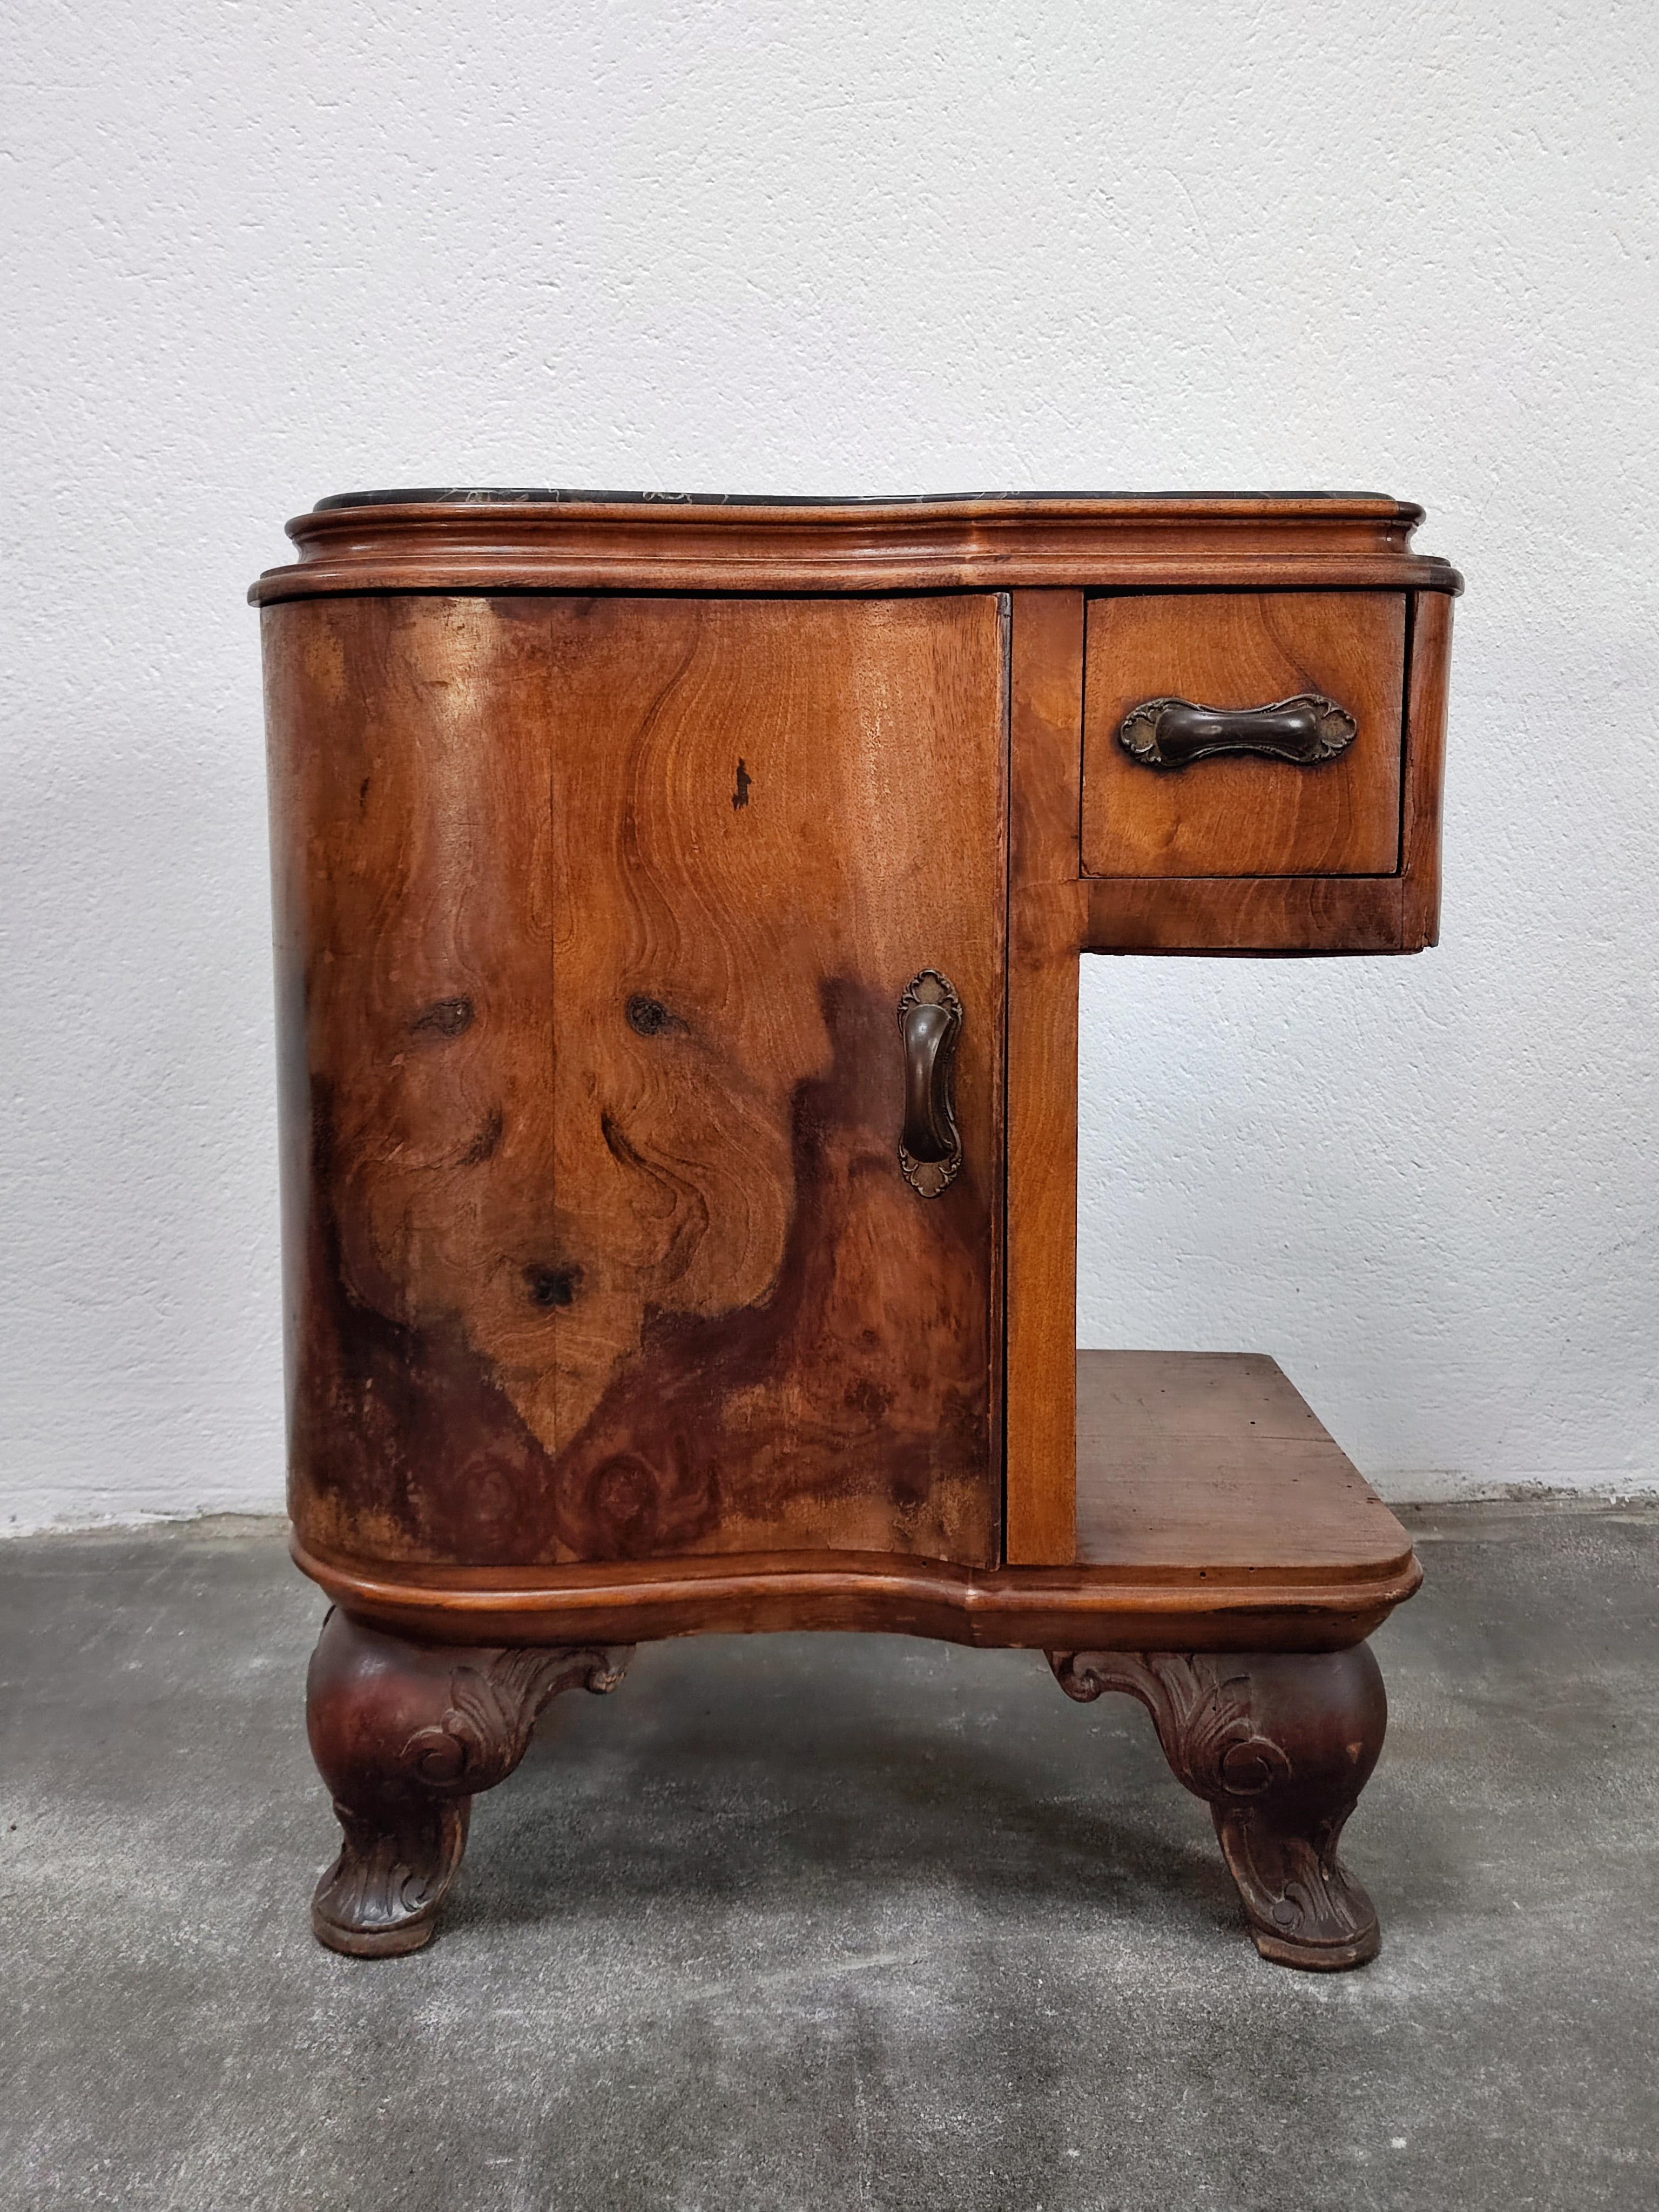 In this listing you will find a pair of lixurious antique nightstands. The nightstands belong to Art Deco period, inspired with modified venetian baroque, with their feet done by machine driven tool. They feature curved doors and are done in walnut